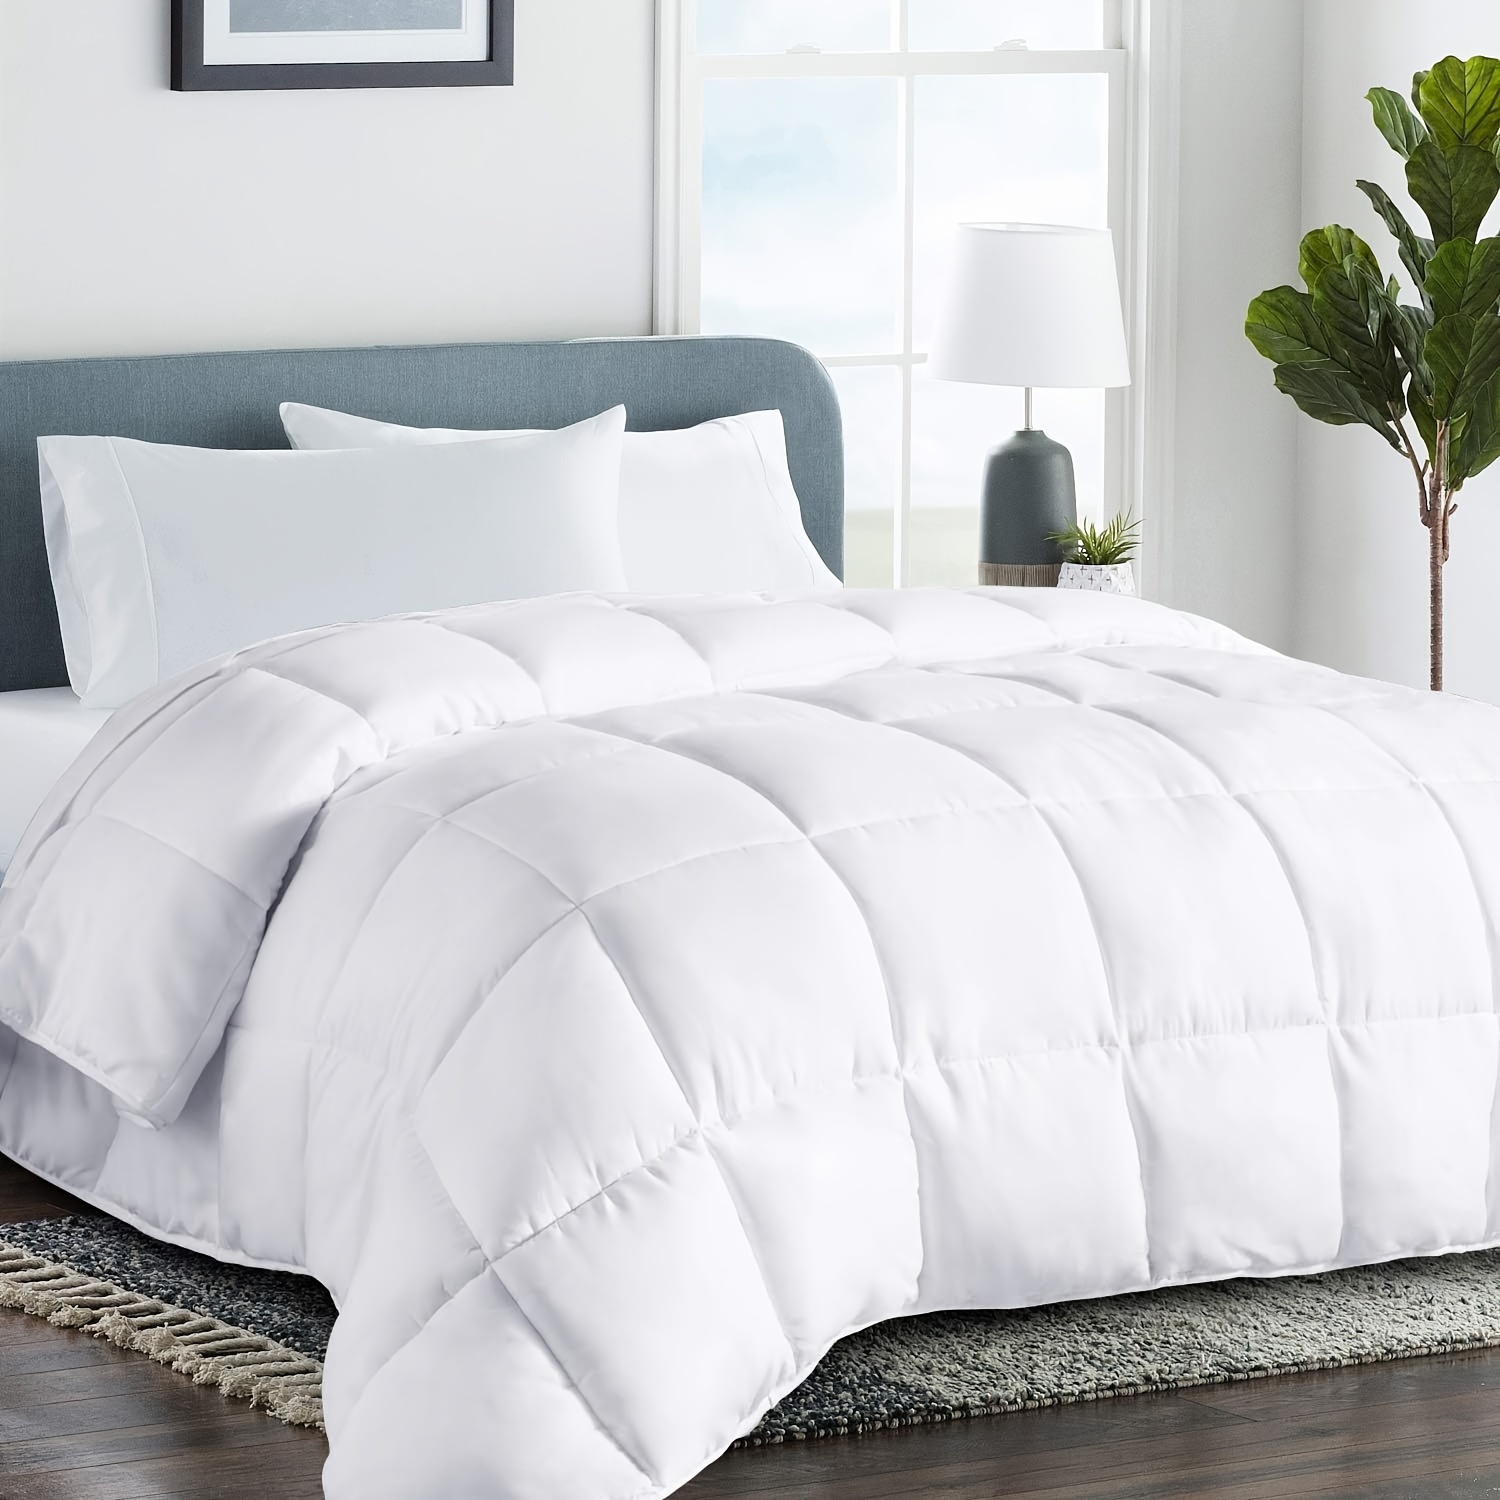 

Down Alternative Comforter All Season Duvet Insert (white)-ultra Soft Double Brushed Microfiber Quilt Cover, Classic Box Stitched With 8 Corner Tabs